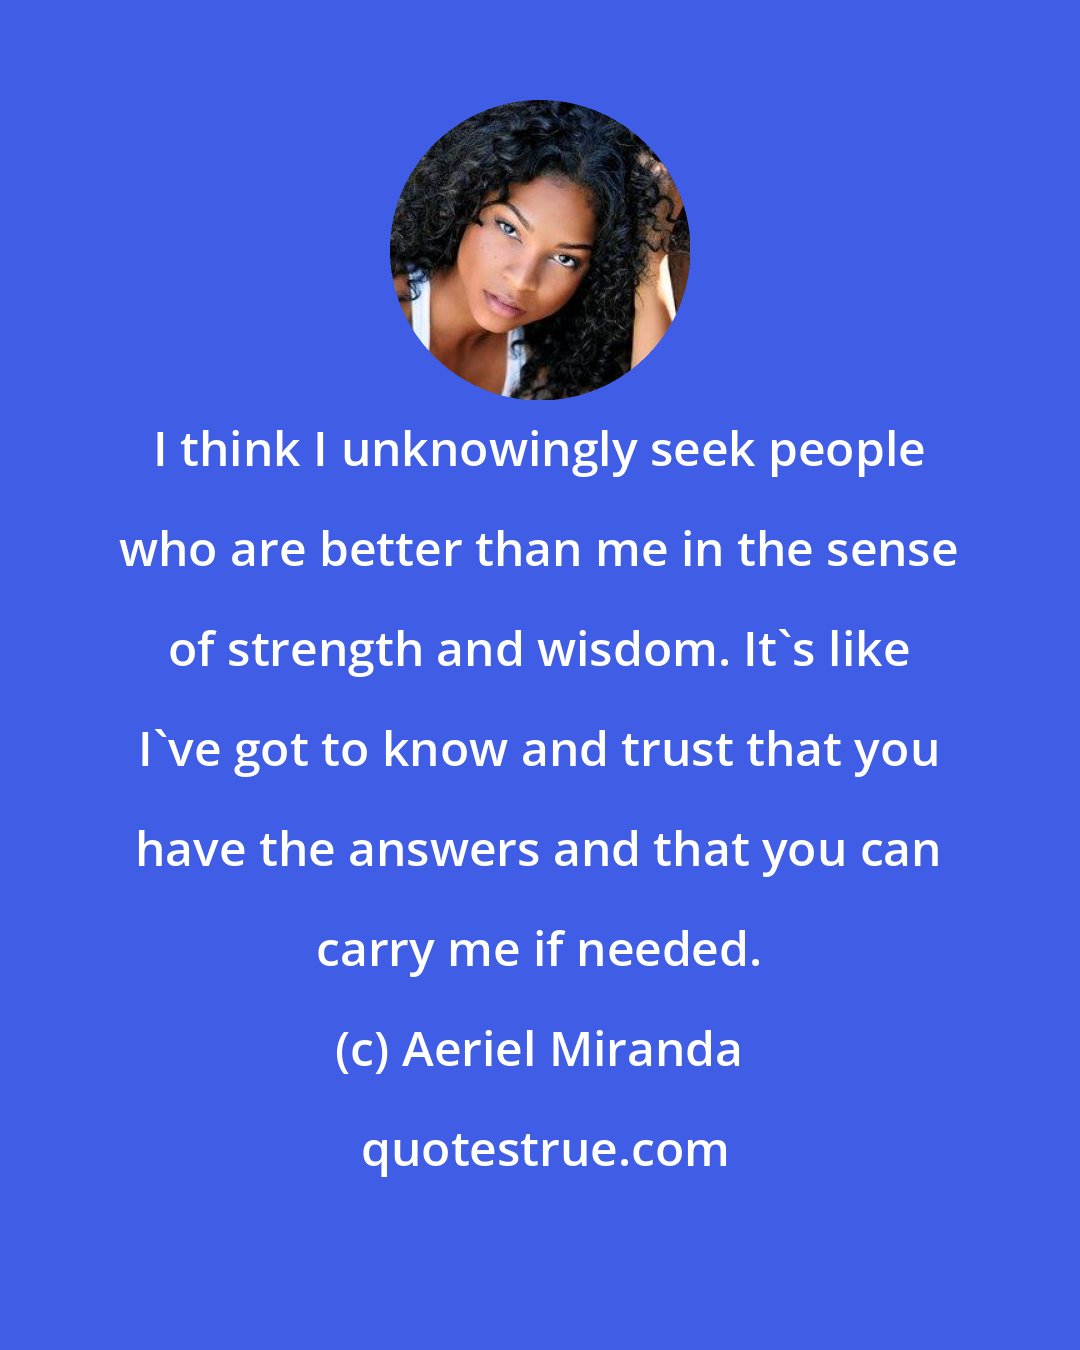 Aeriel Miranda: I think I unknowingly seek people who are better than me in the sense of strength and wisdom. It's like I've got to know and trust that you have the answers and that you can carry me if needed.